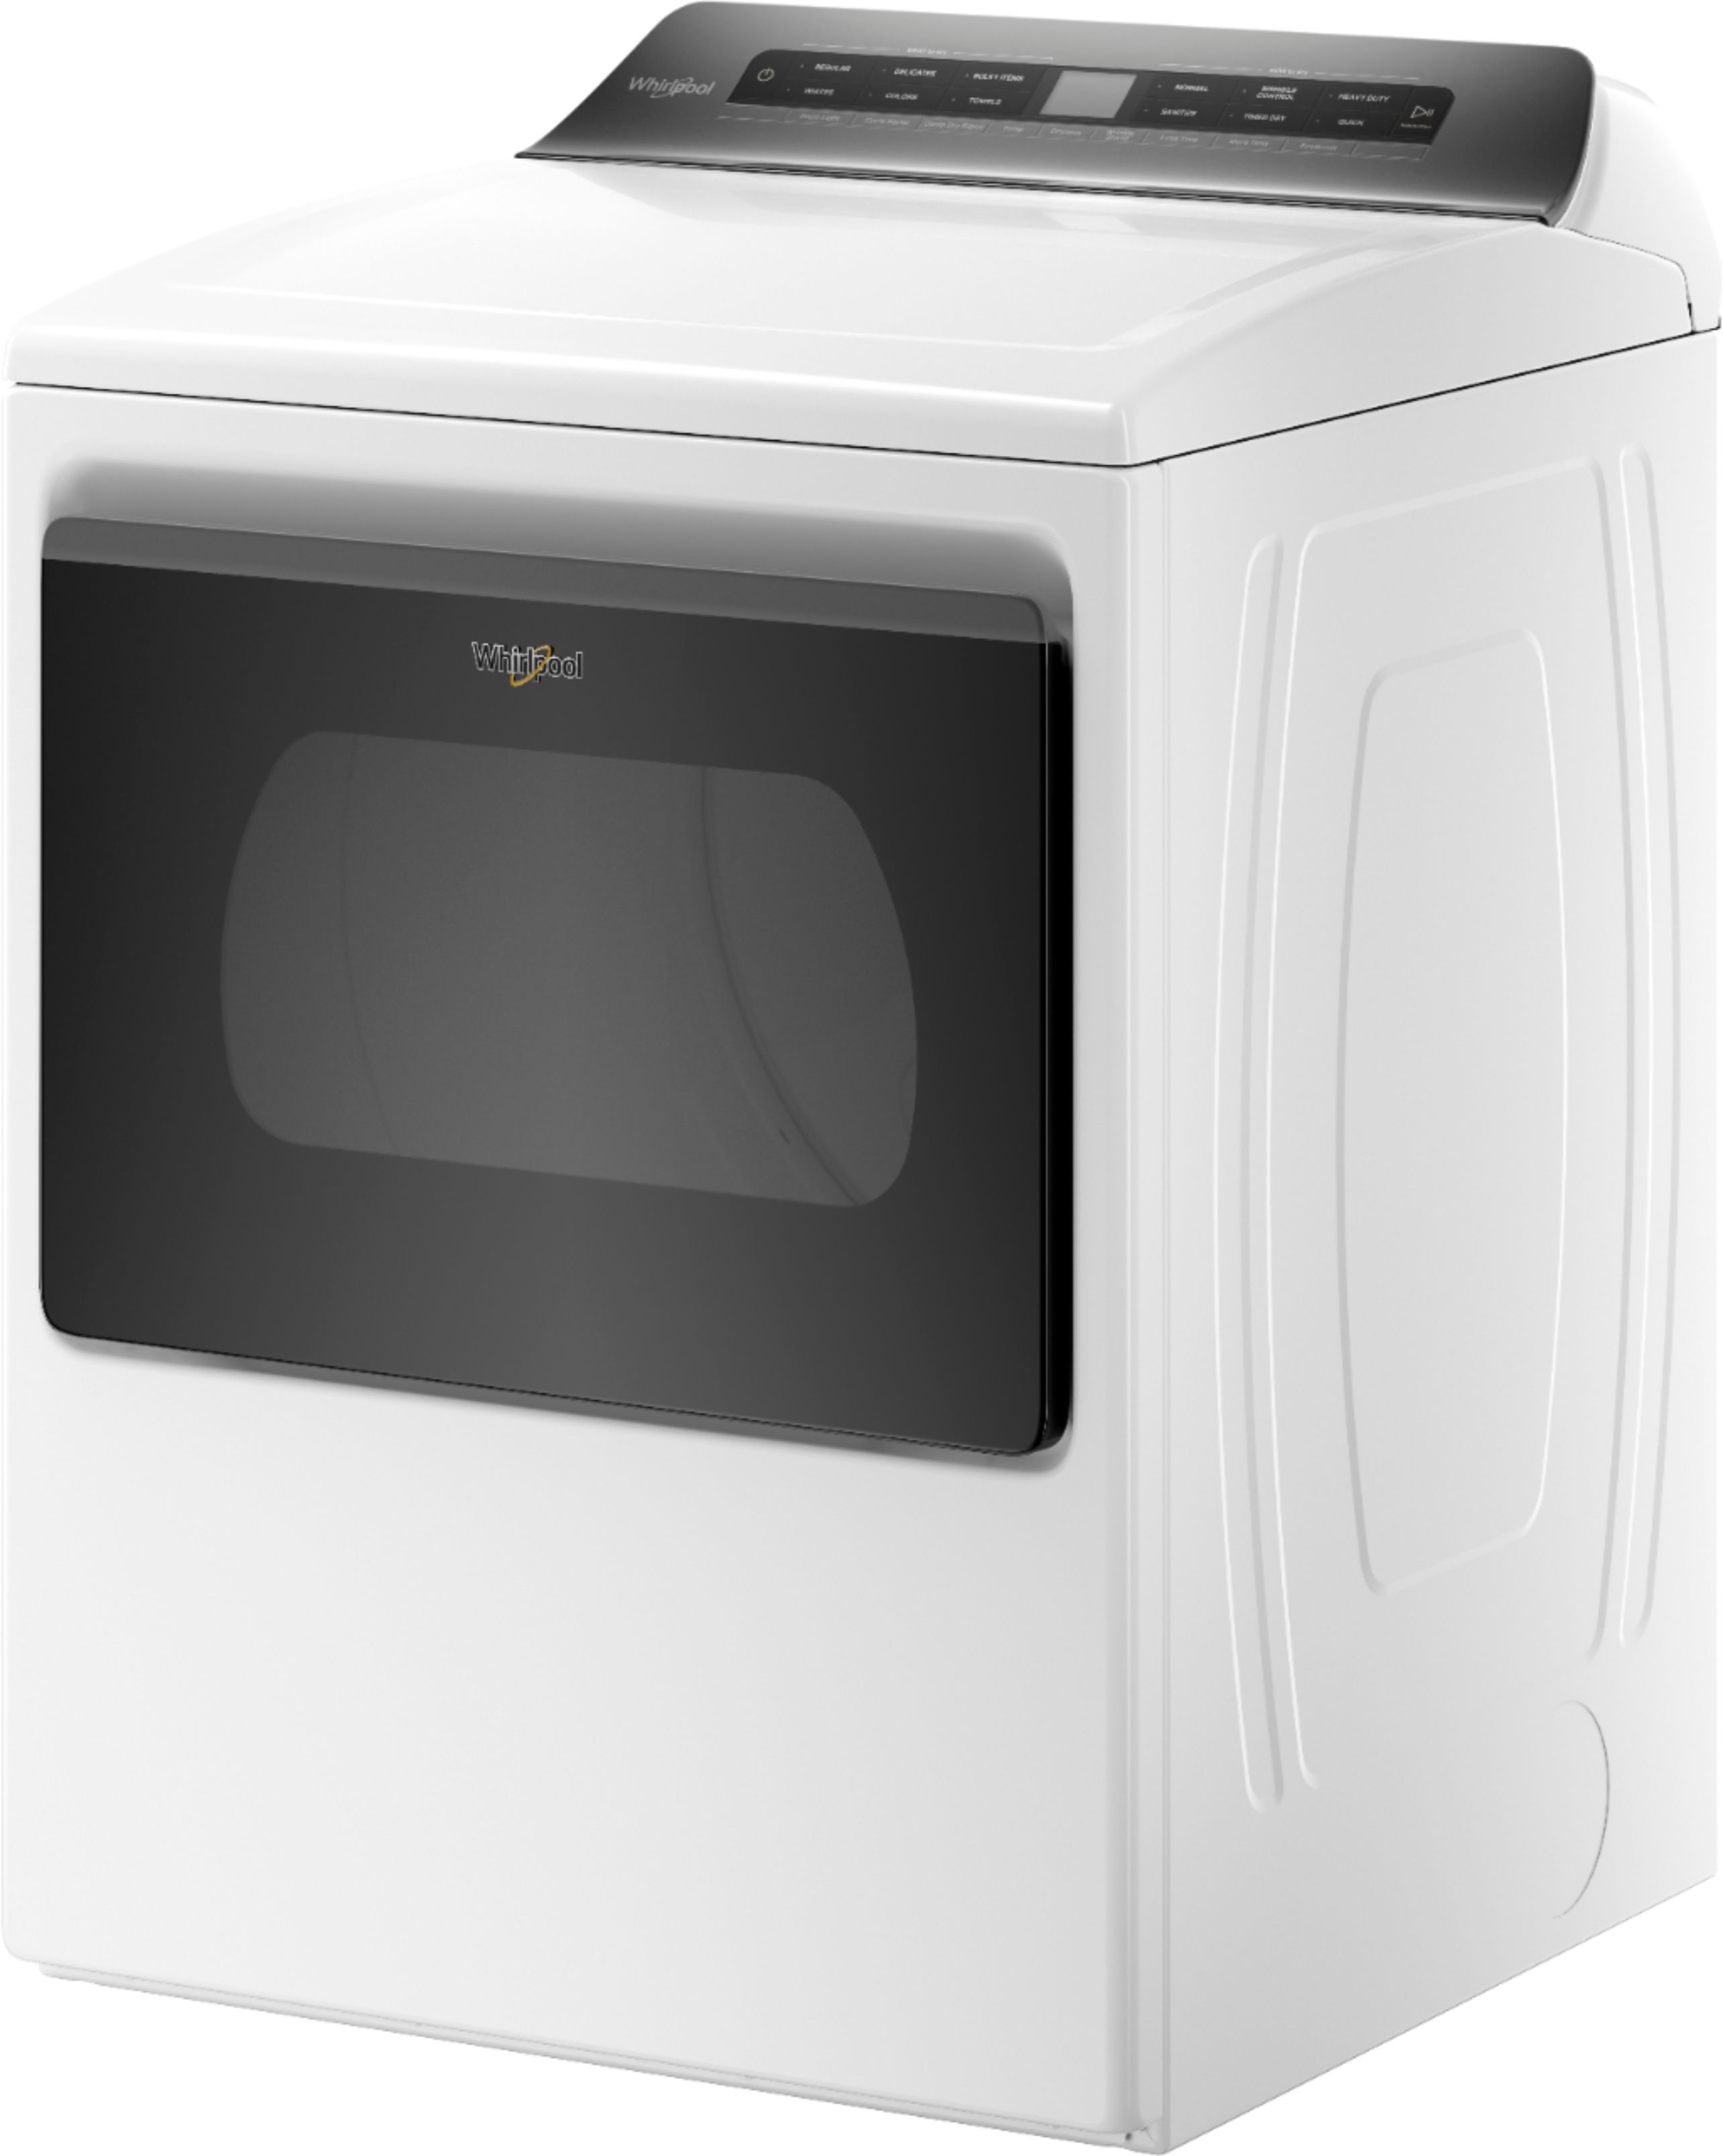 Left View: Whirlpool - 7.4 Cu. Ft. Stackable Gas Dryer with Wrinkle Shield - Chrome shadow